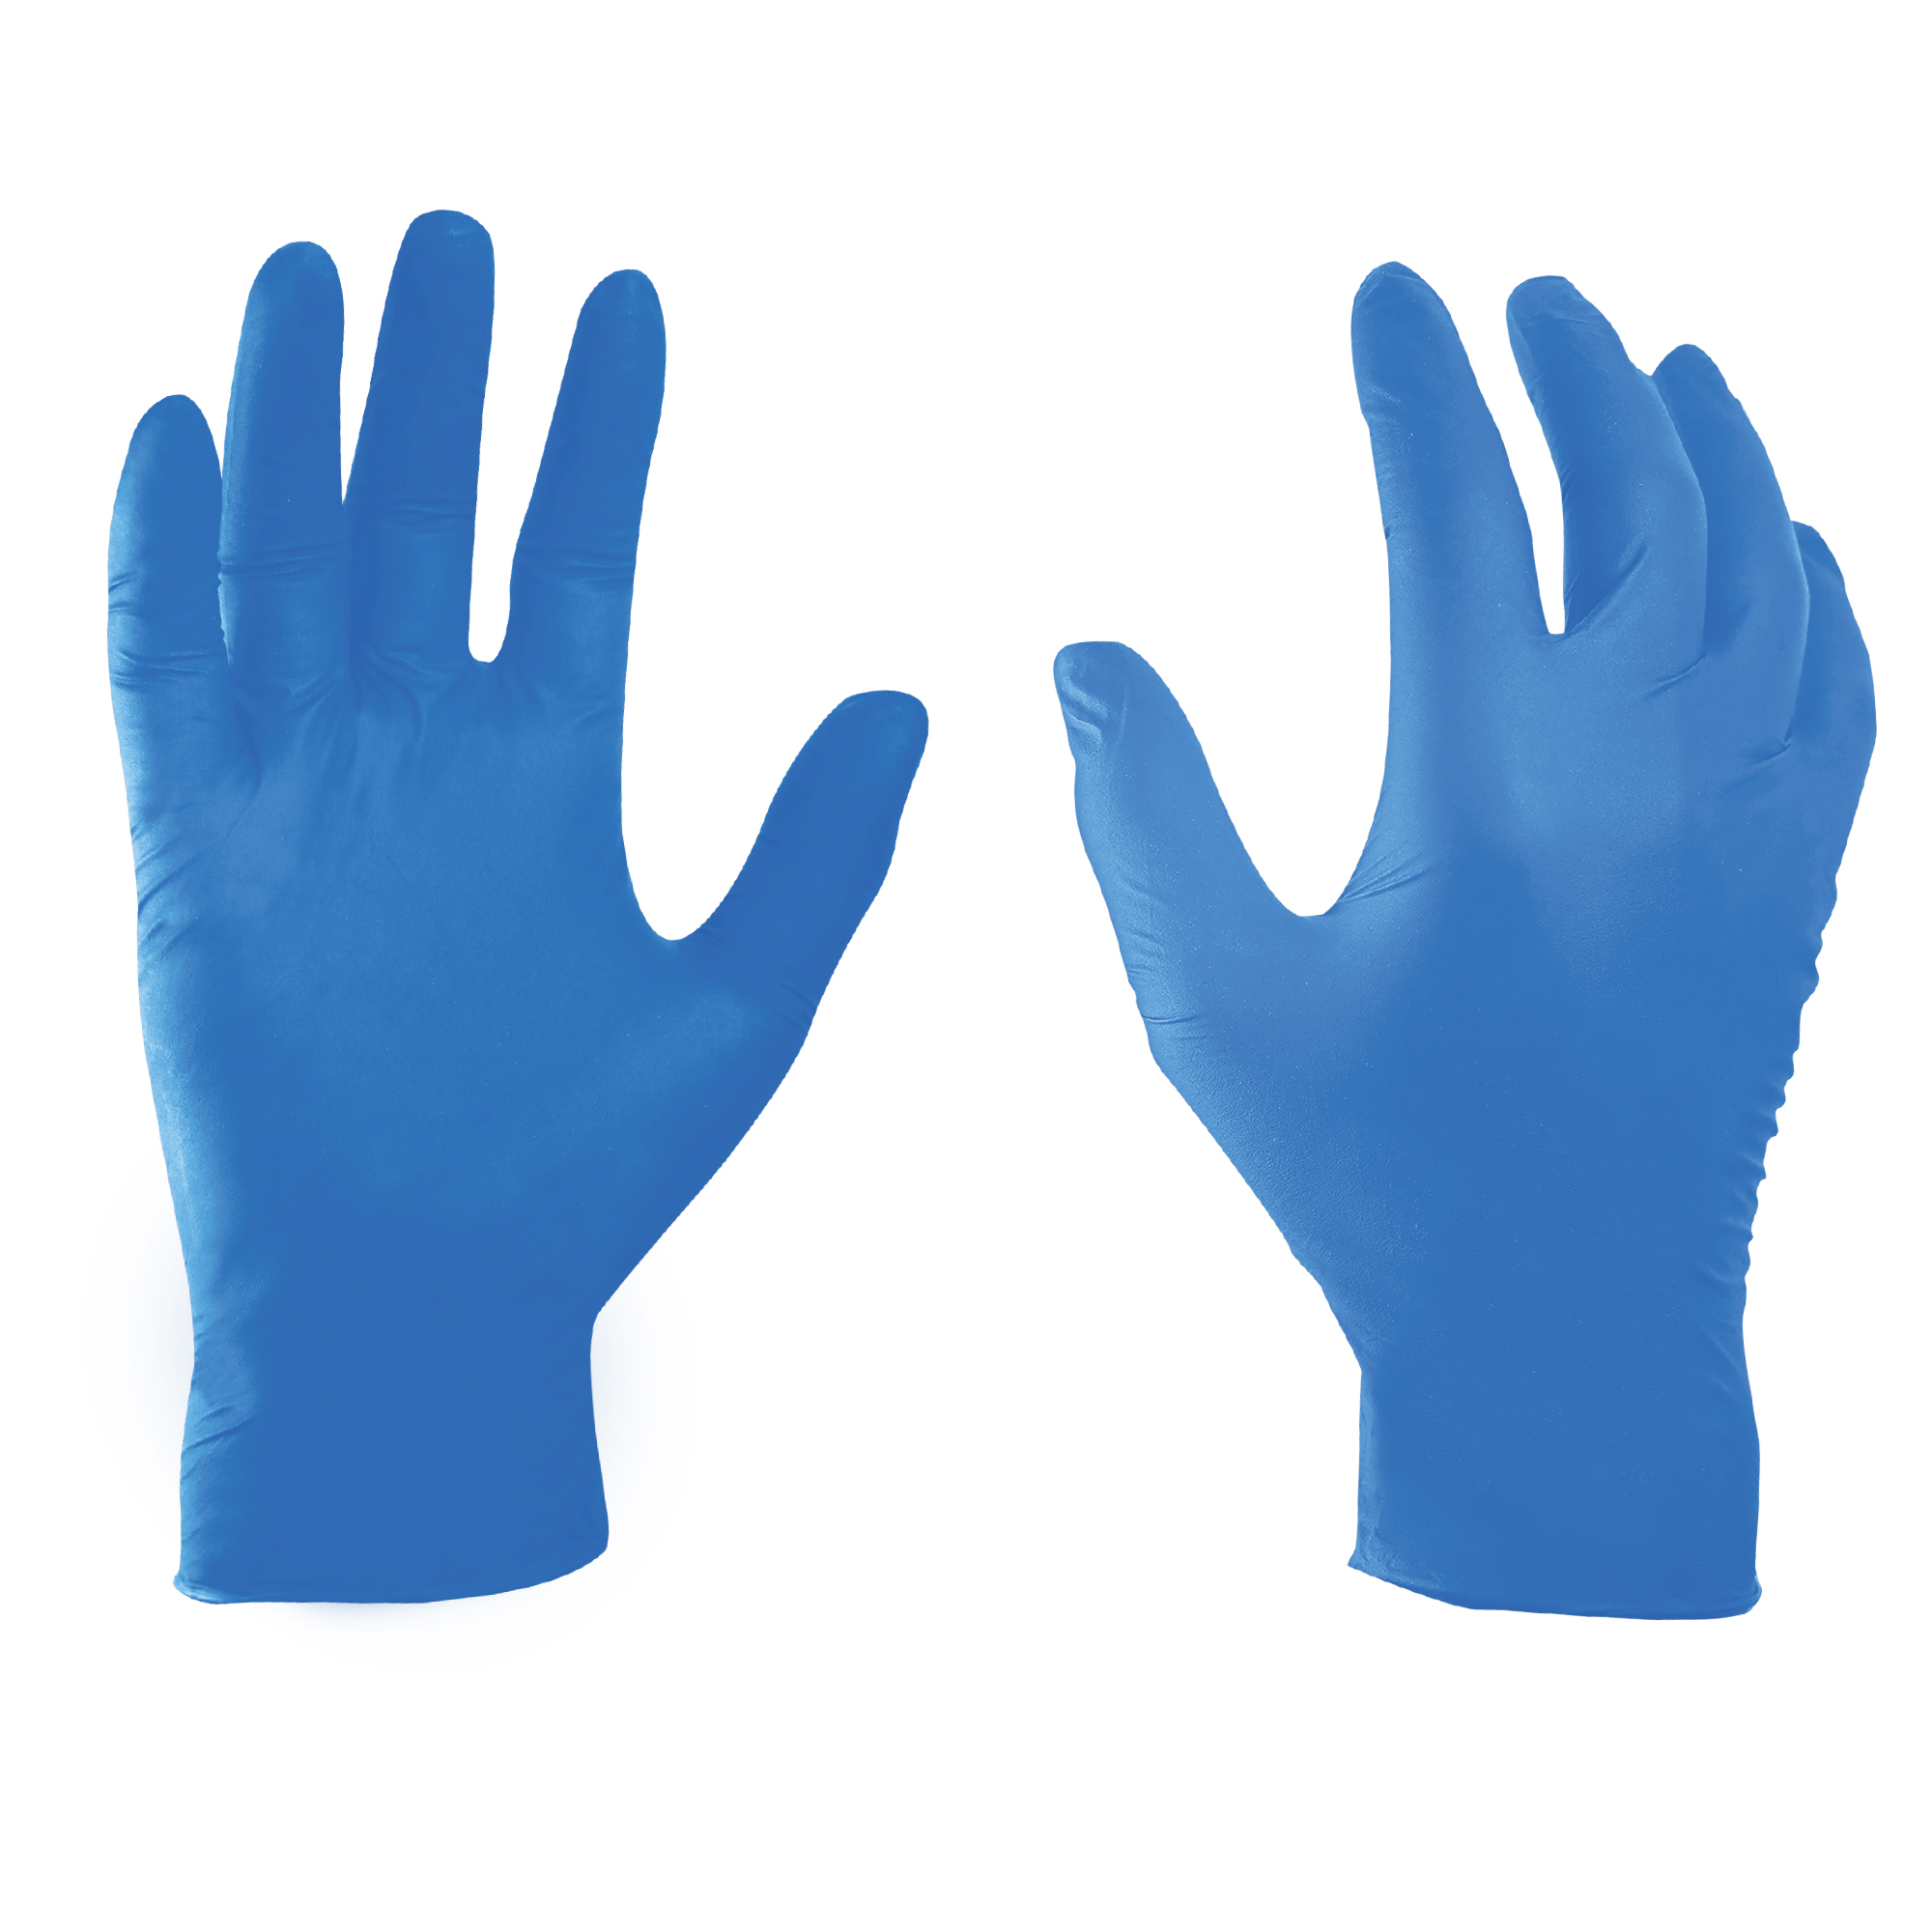 General Electric, 6mil Nitrile Blue Extra large Gloves 100pk, Size XL, Color Blue, Included (qty.) 100 Model GG610XL